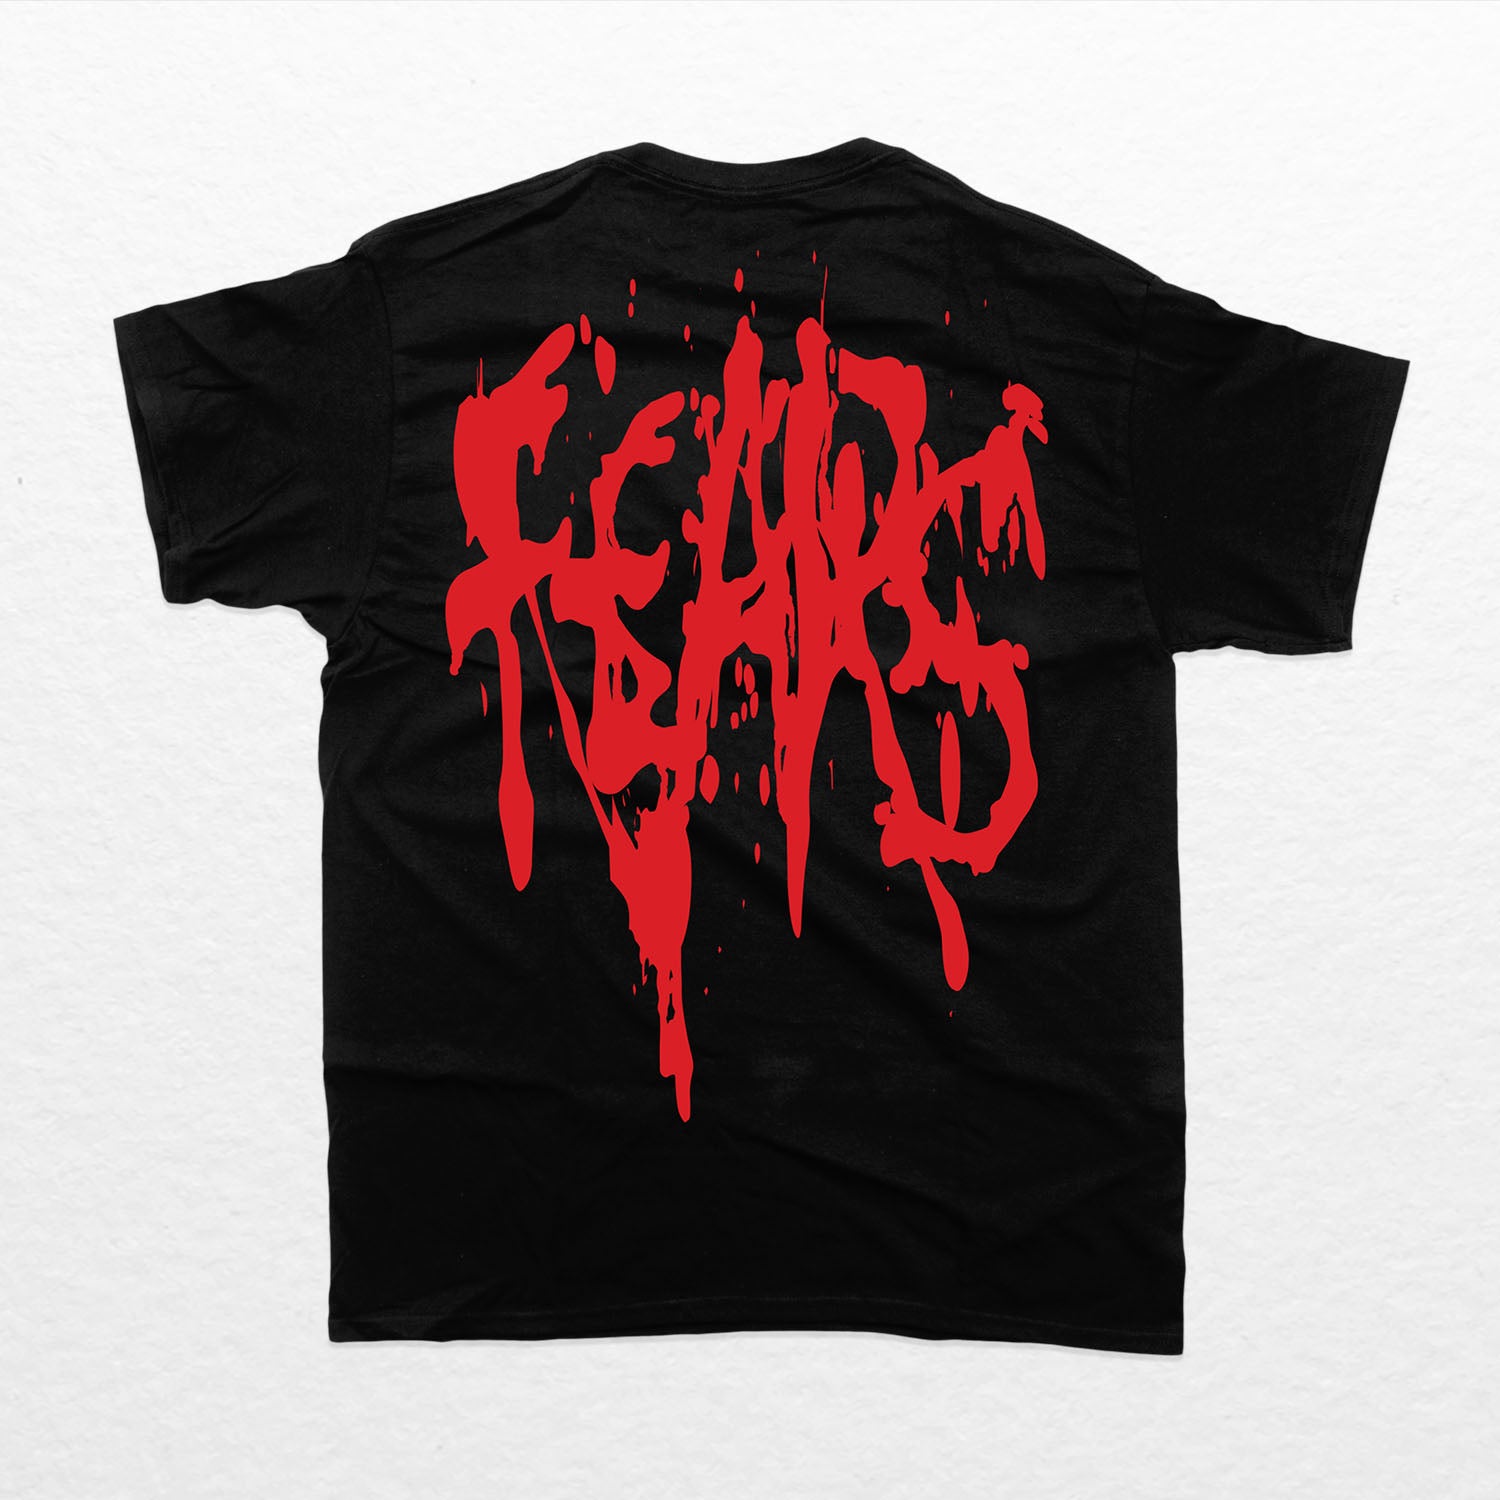 American Psycho Blood T-shirt by Personal Fears. Back Of T Shirt.